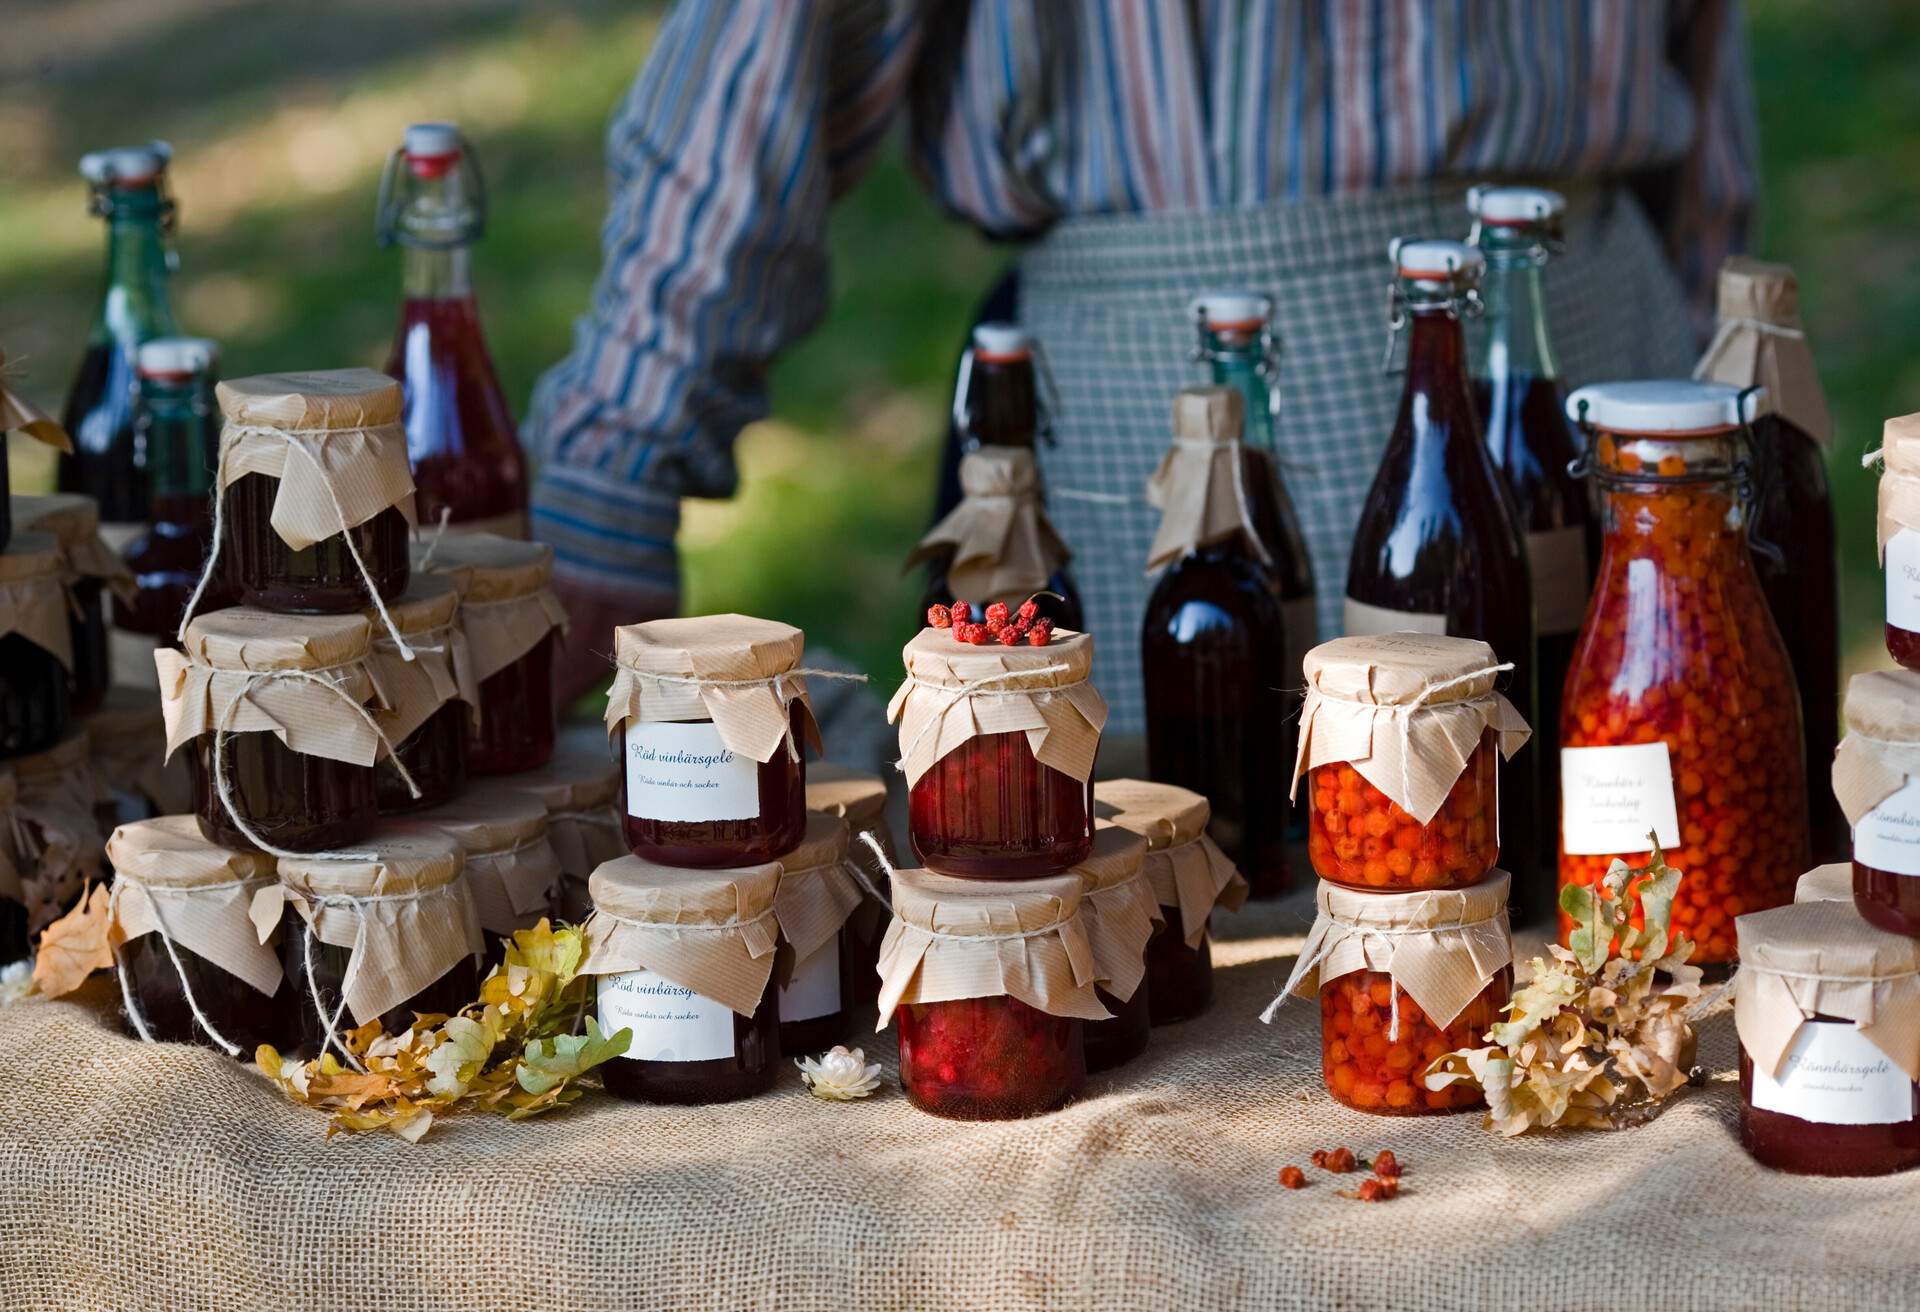 Homemade jars of jam and fruit juices for sale at a farmers' market.